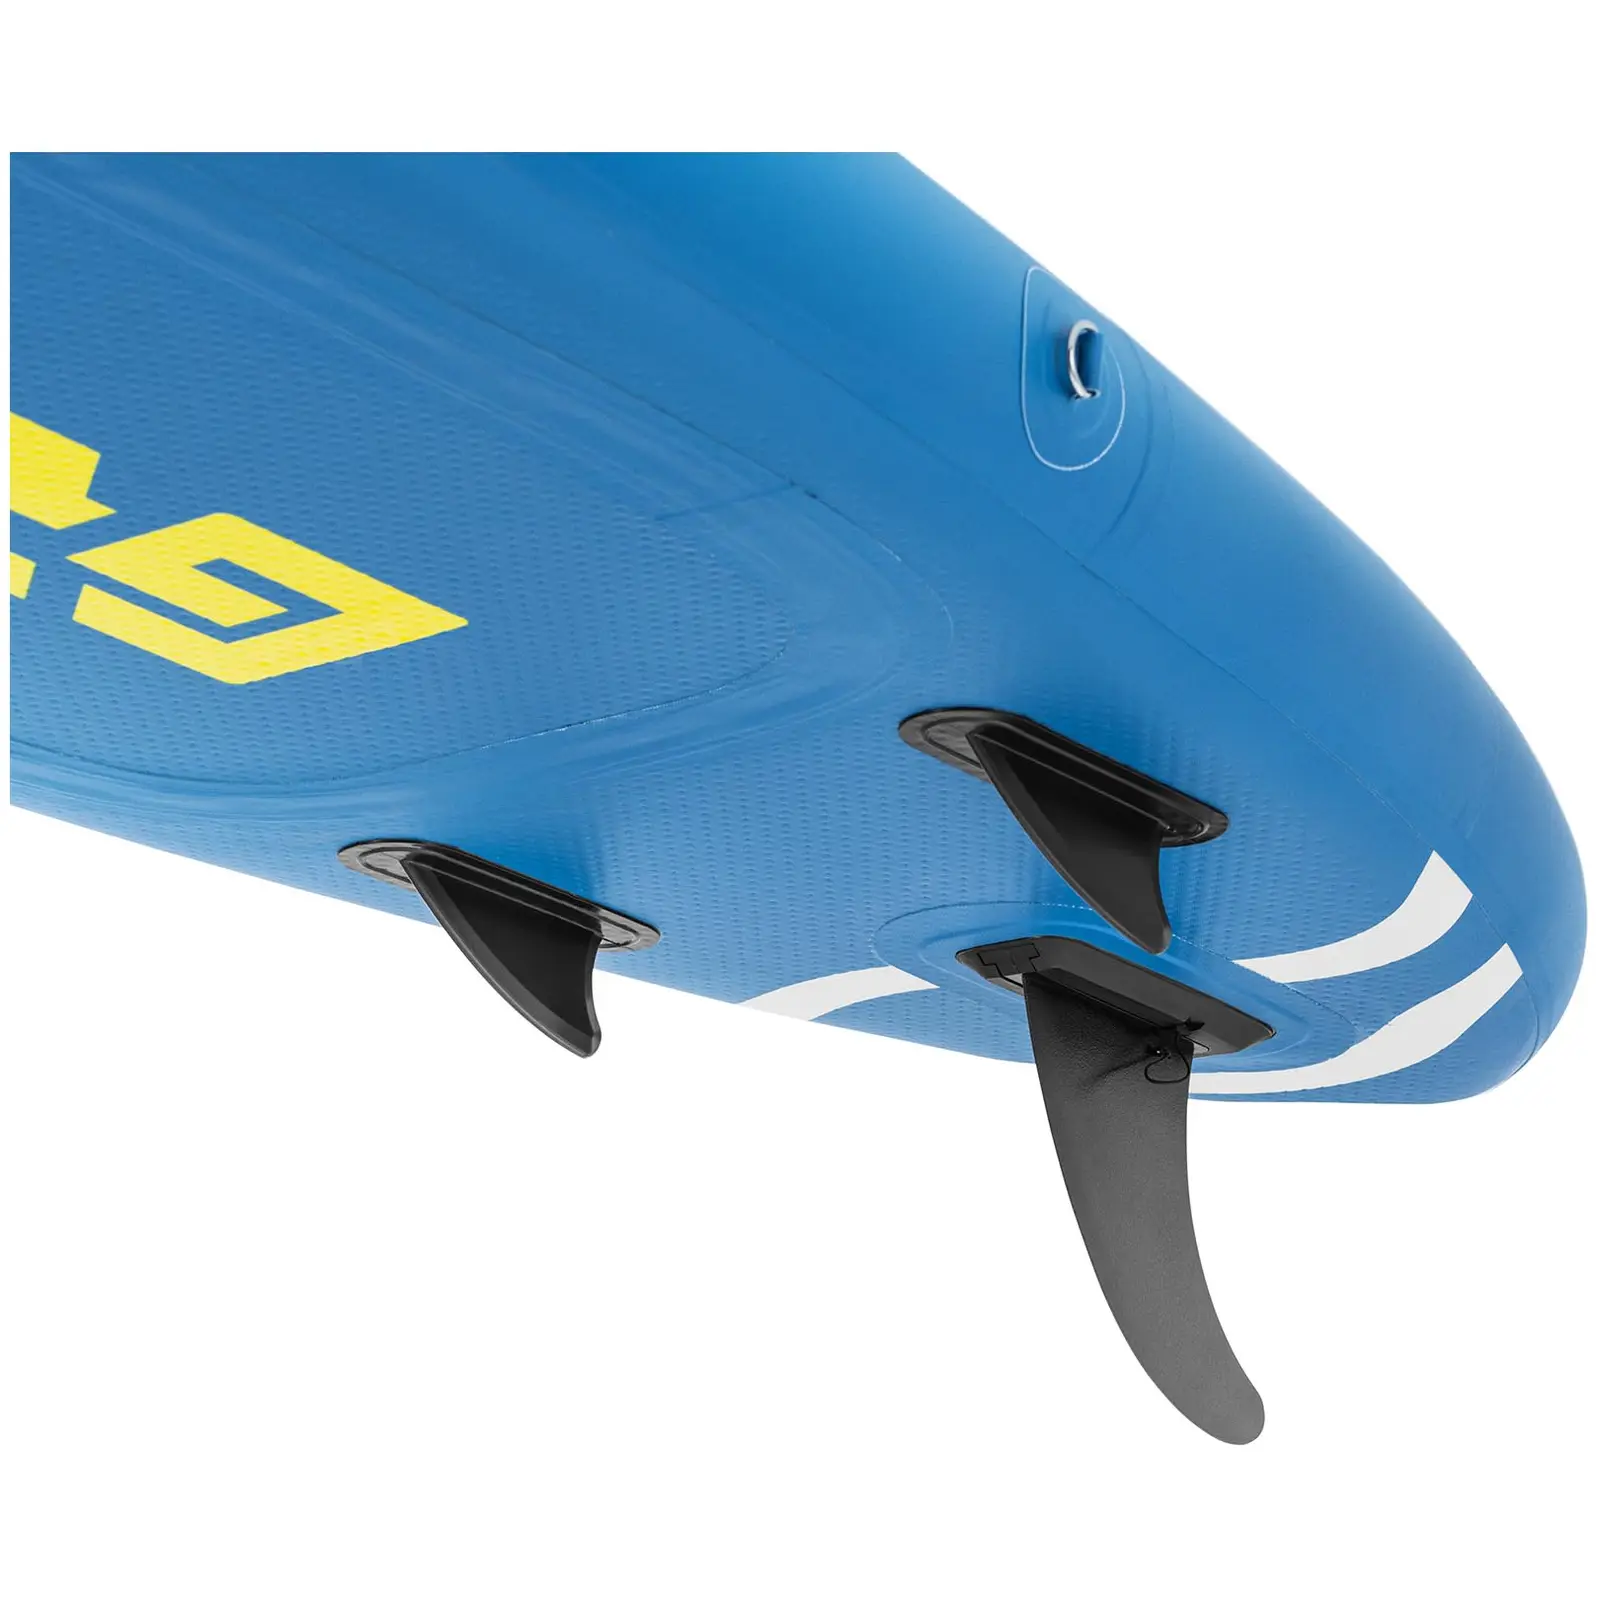 Inflatable paddle board - inflatable - 125 kg - blue - double chamber - 333 x 82 x 12 cm